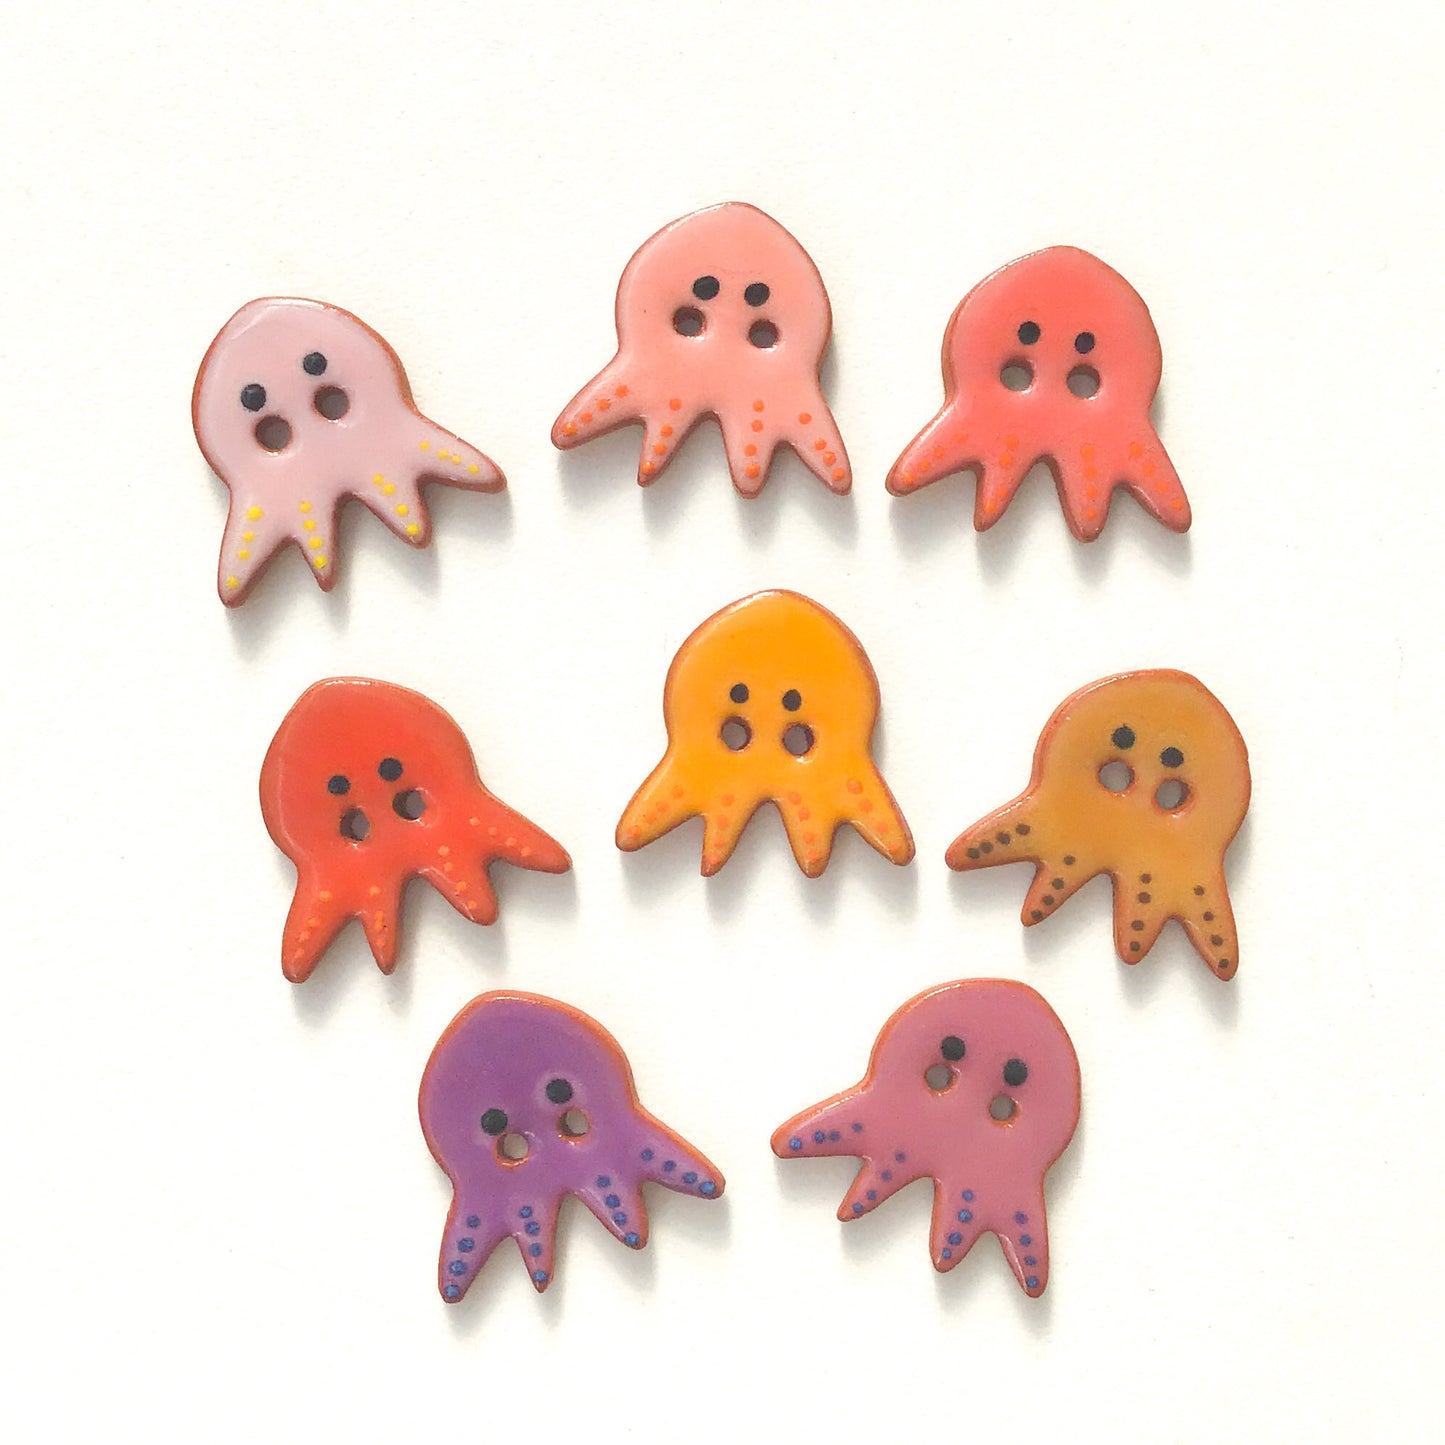 'Earth Tones' Octopus Buttons - Ceramic Ceramic Buttons -Children's Animal Buttons (ws-1)